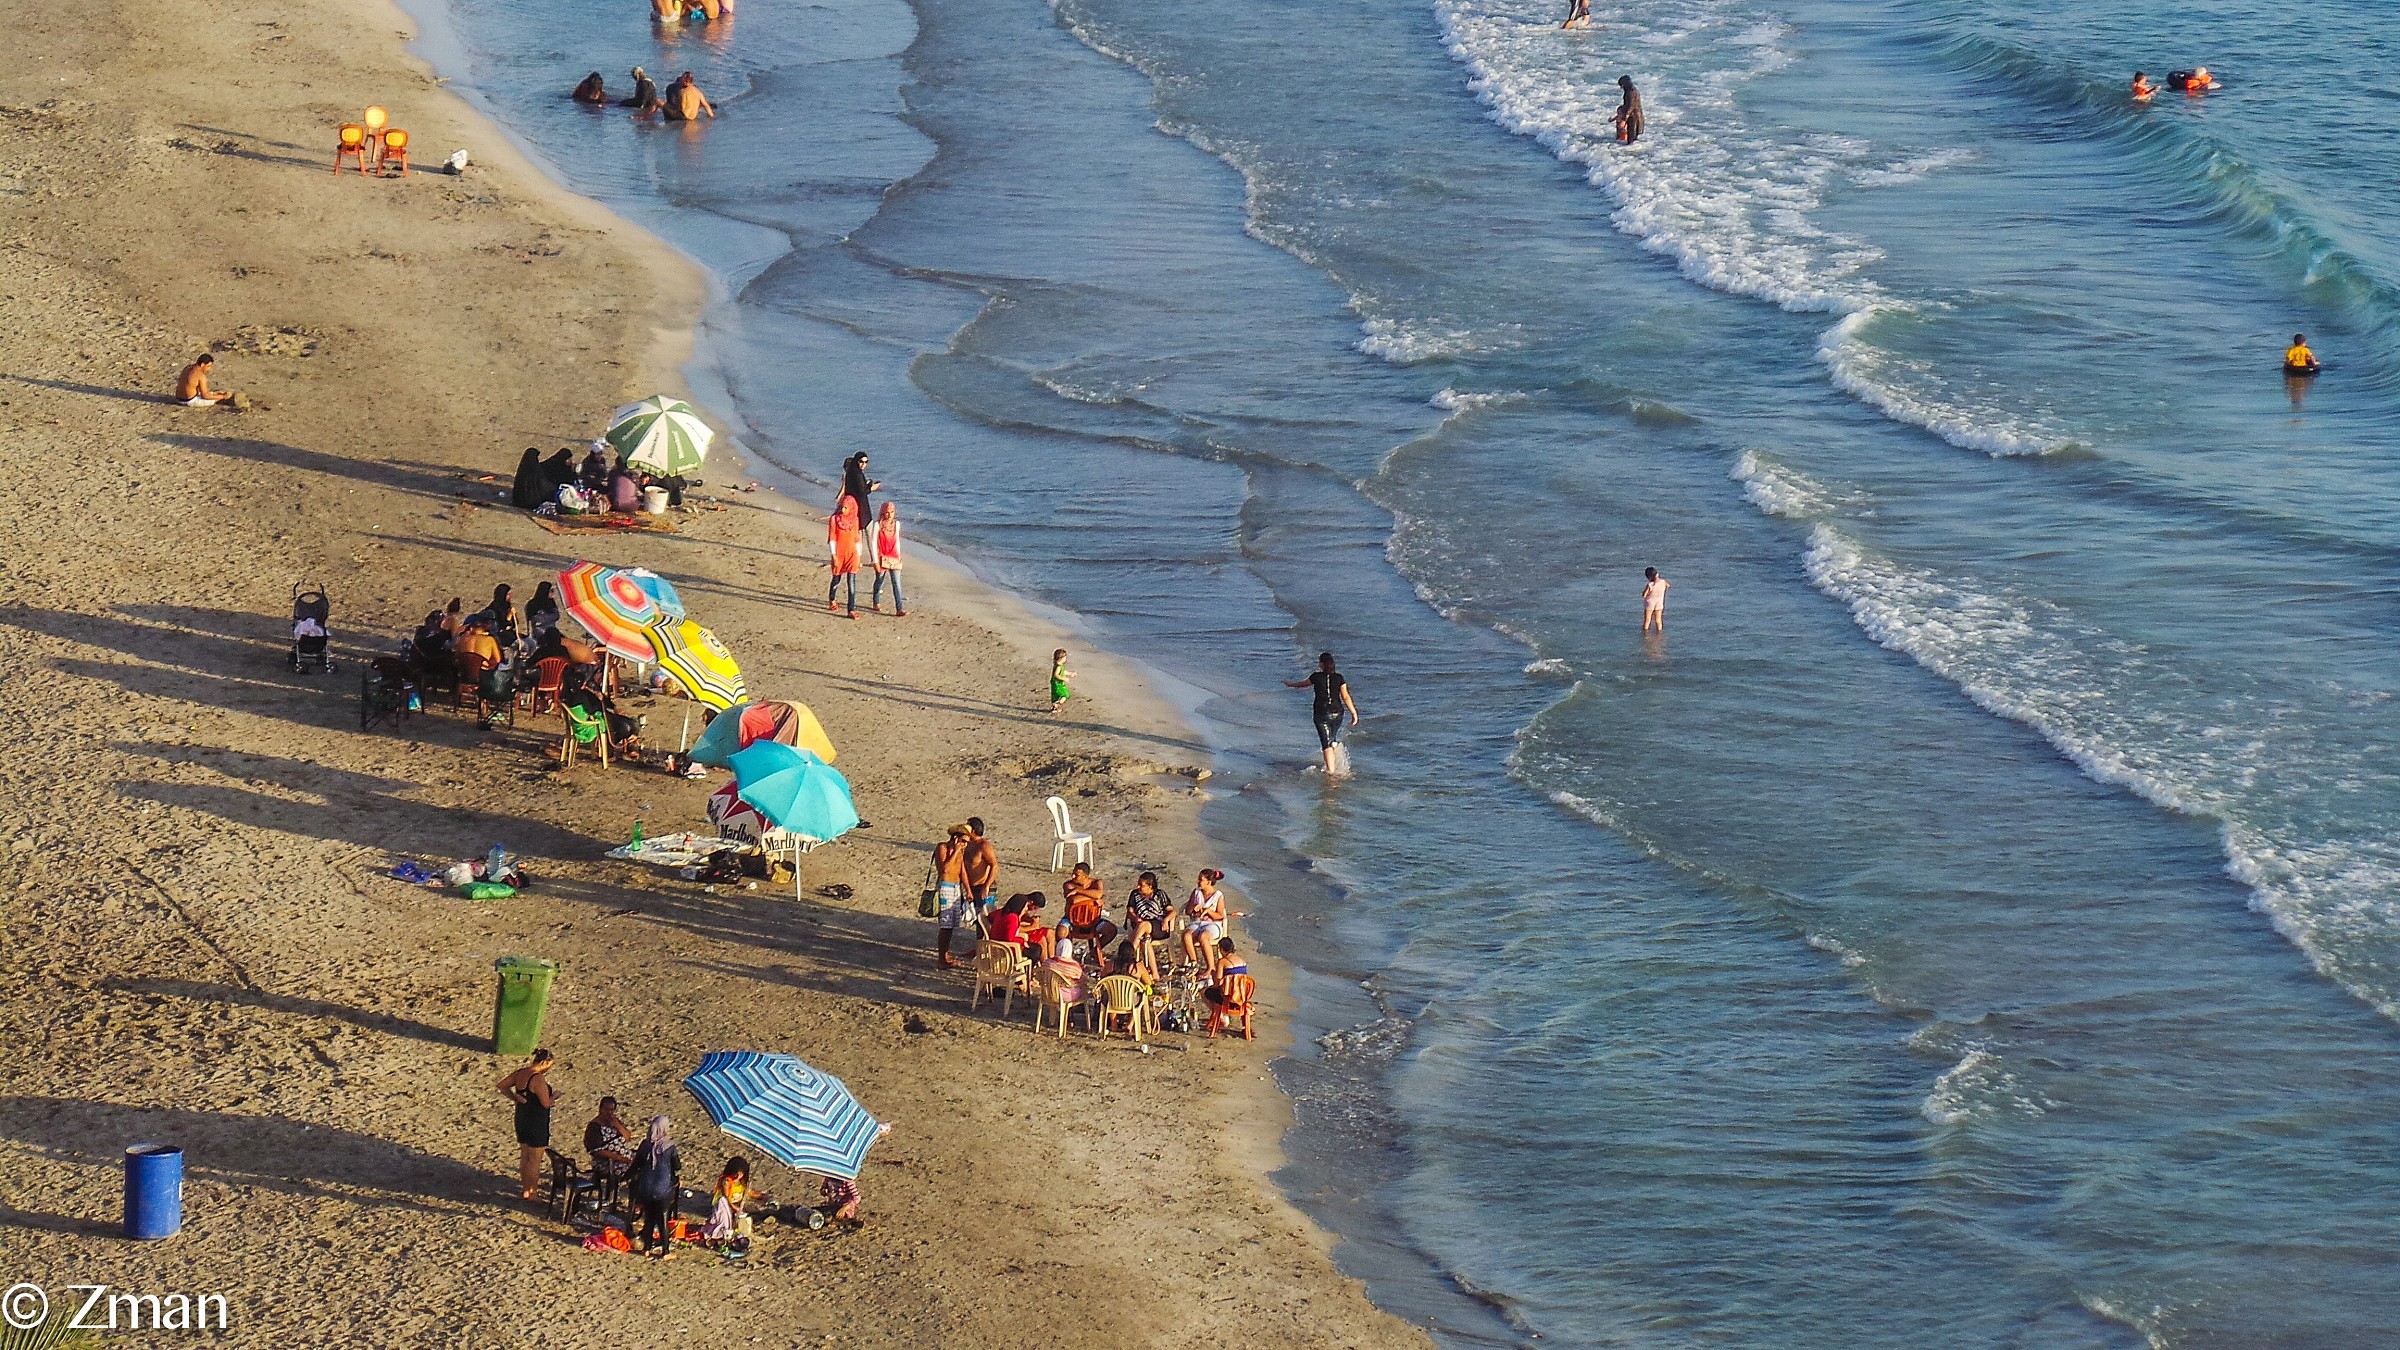 Tyr's Public Beach in The South Of Lebanon...